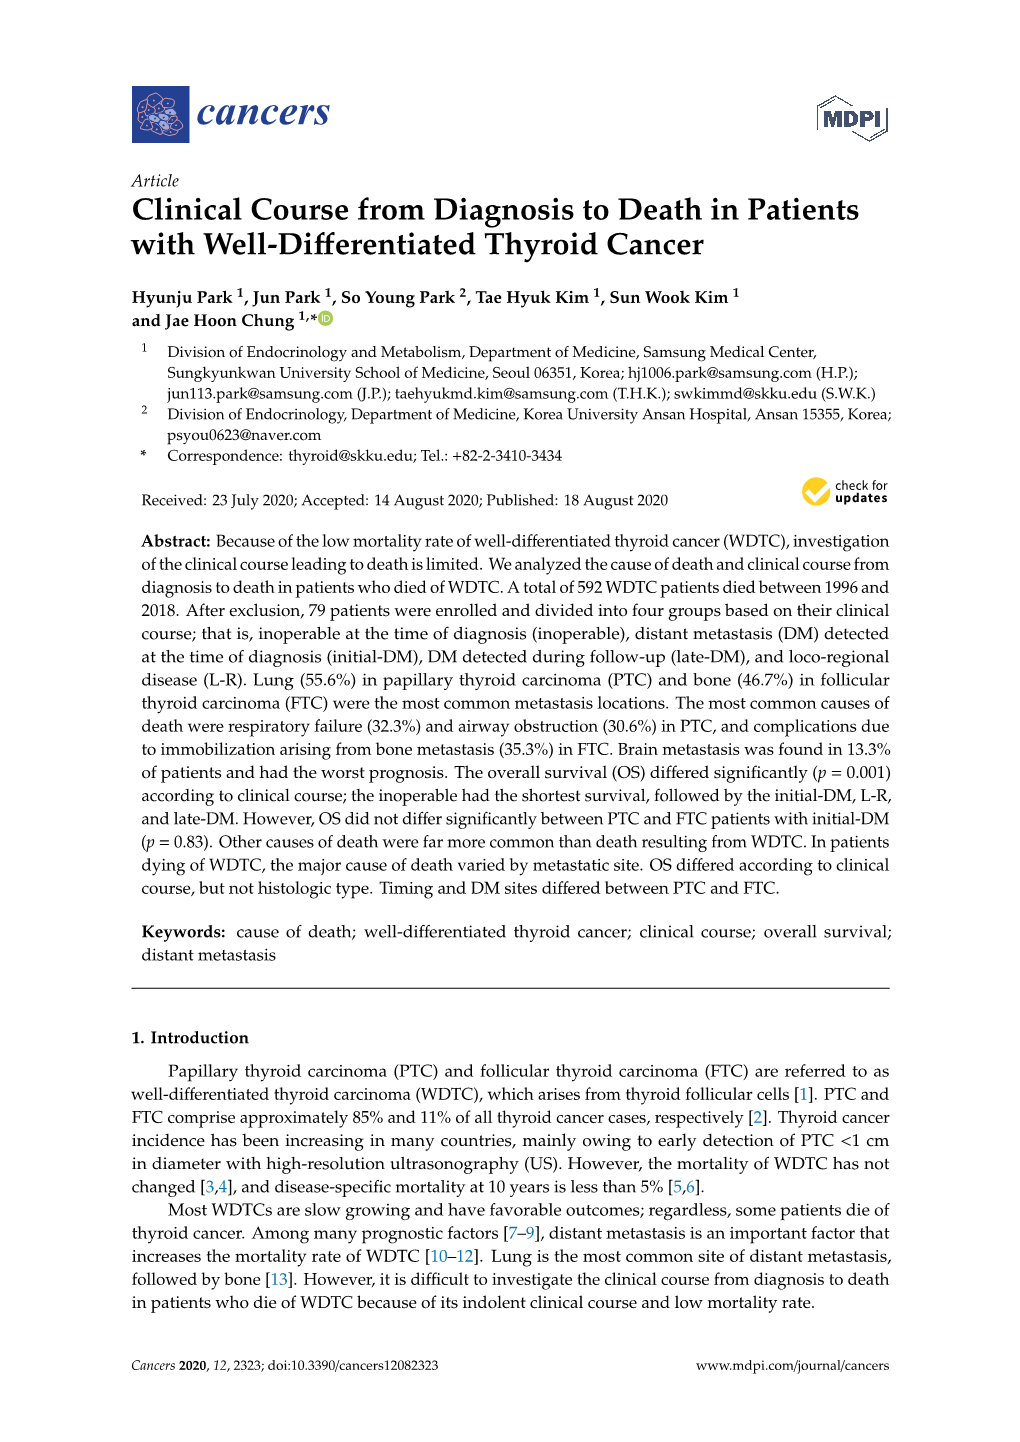 Clinical Course from Diagnosis to Death in Patients with Well-Diﬀerentiated Thyroid Cancer